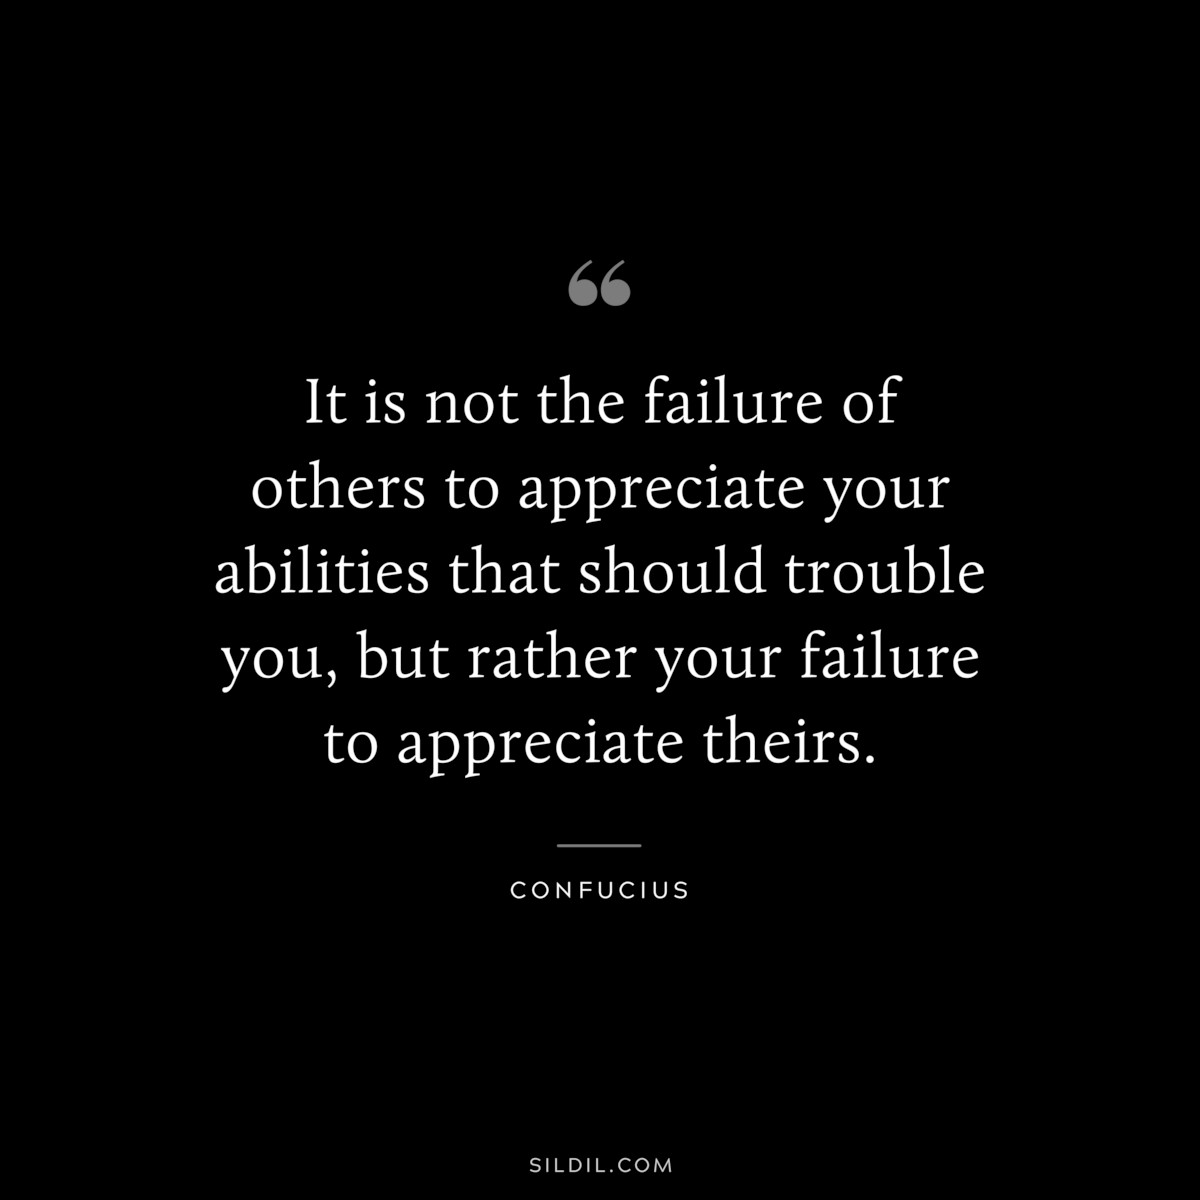 It is not the failure of others to appreciate your abilities that should trouble you, but rather your failure to appreciate theirs. ― Confucius